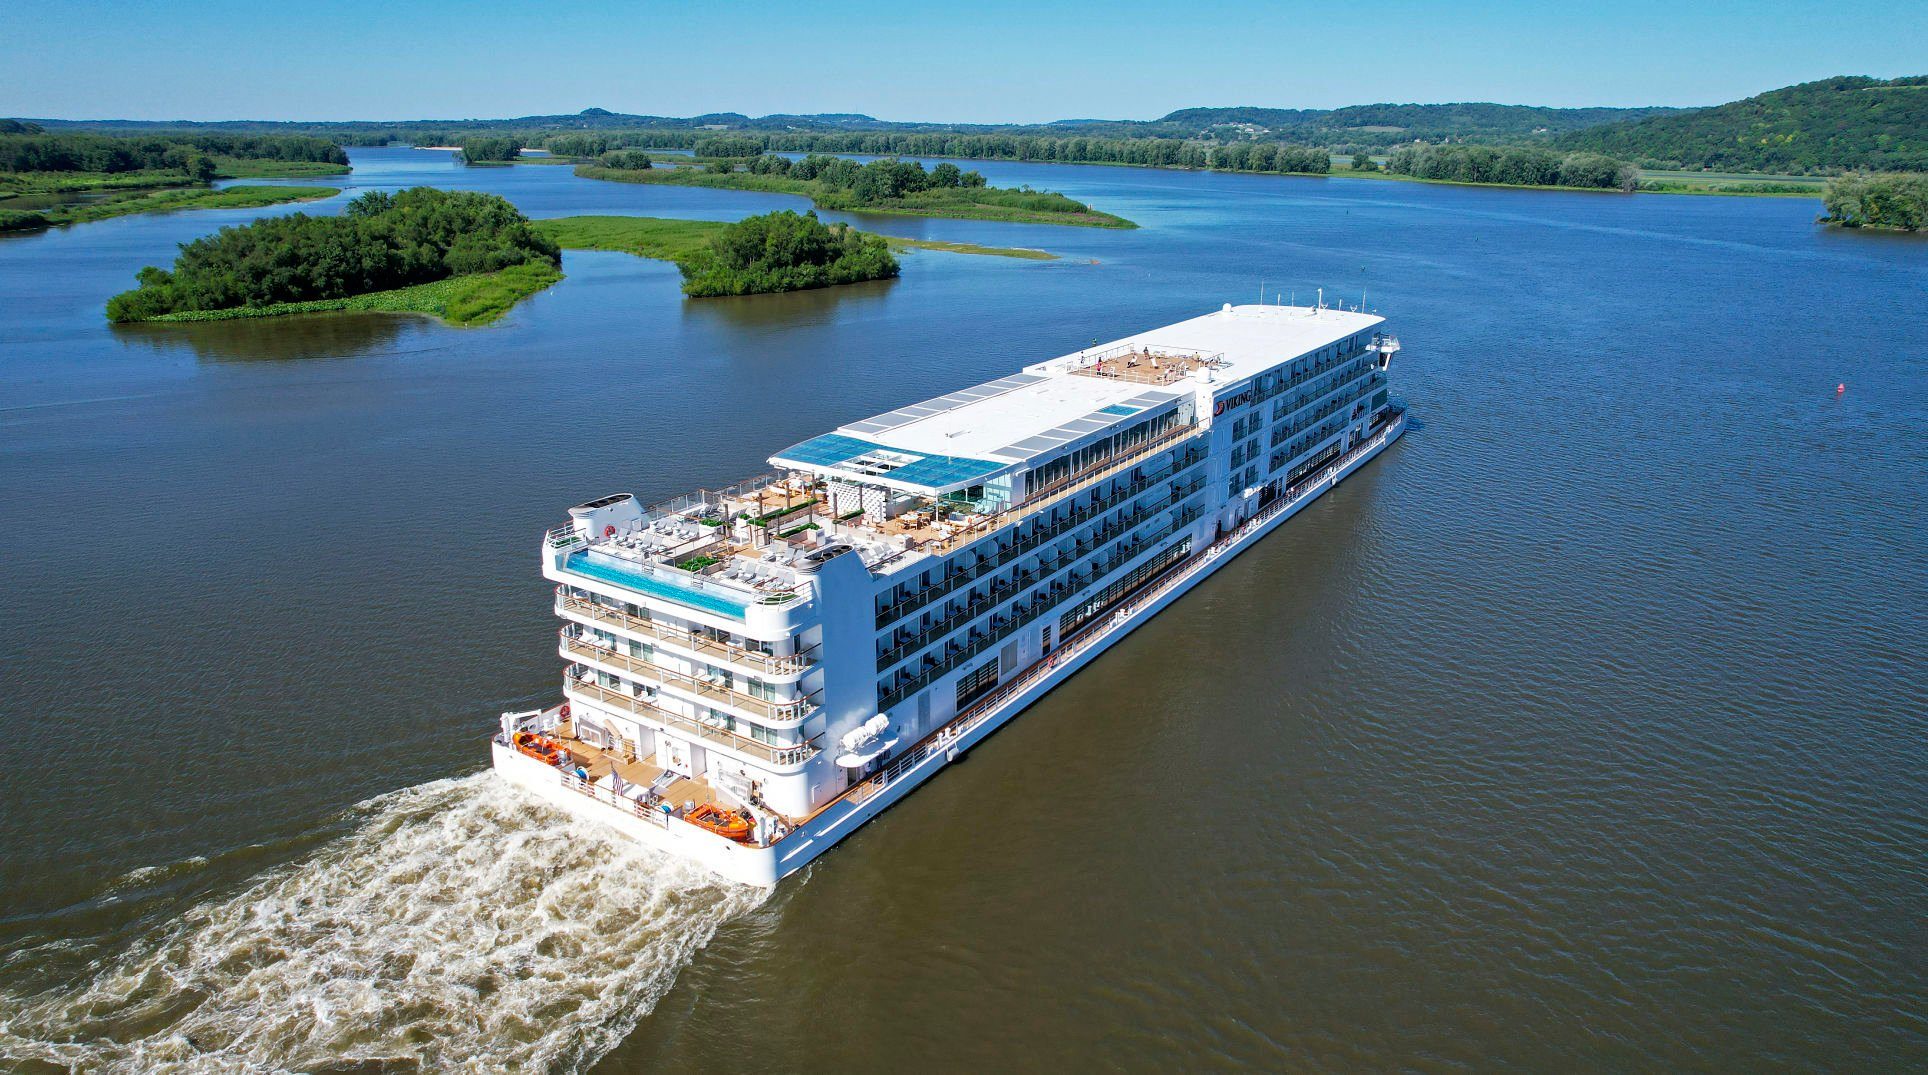 The Viking Mississippi cruise ship navigates the Mississippi River north of Bellevue, Iowa, on Wednesday.    PHOTO CREDIT: Dave Kettering